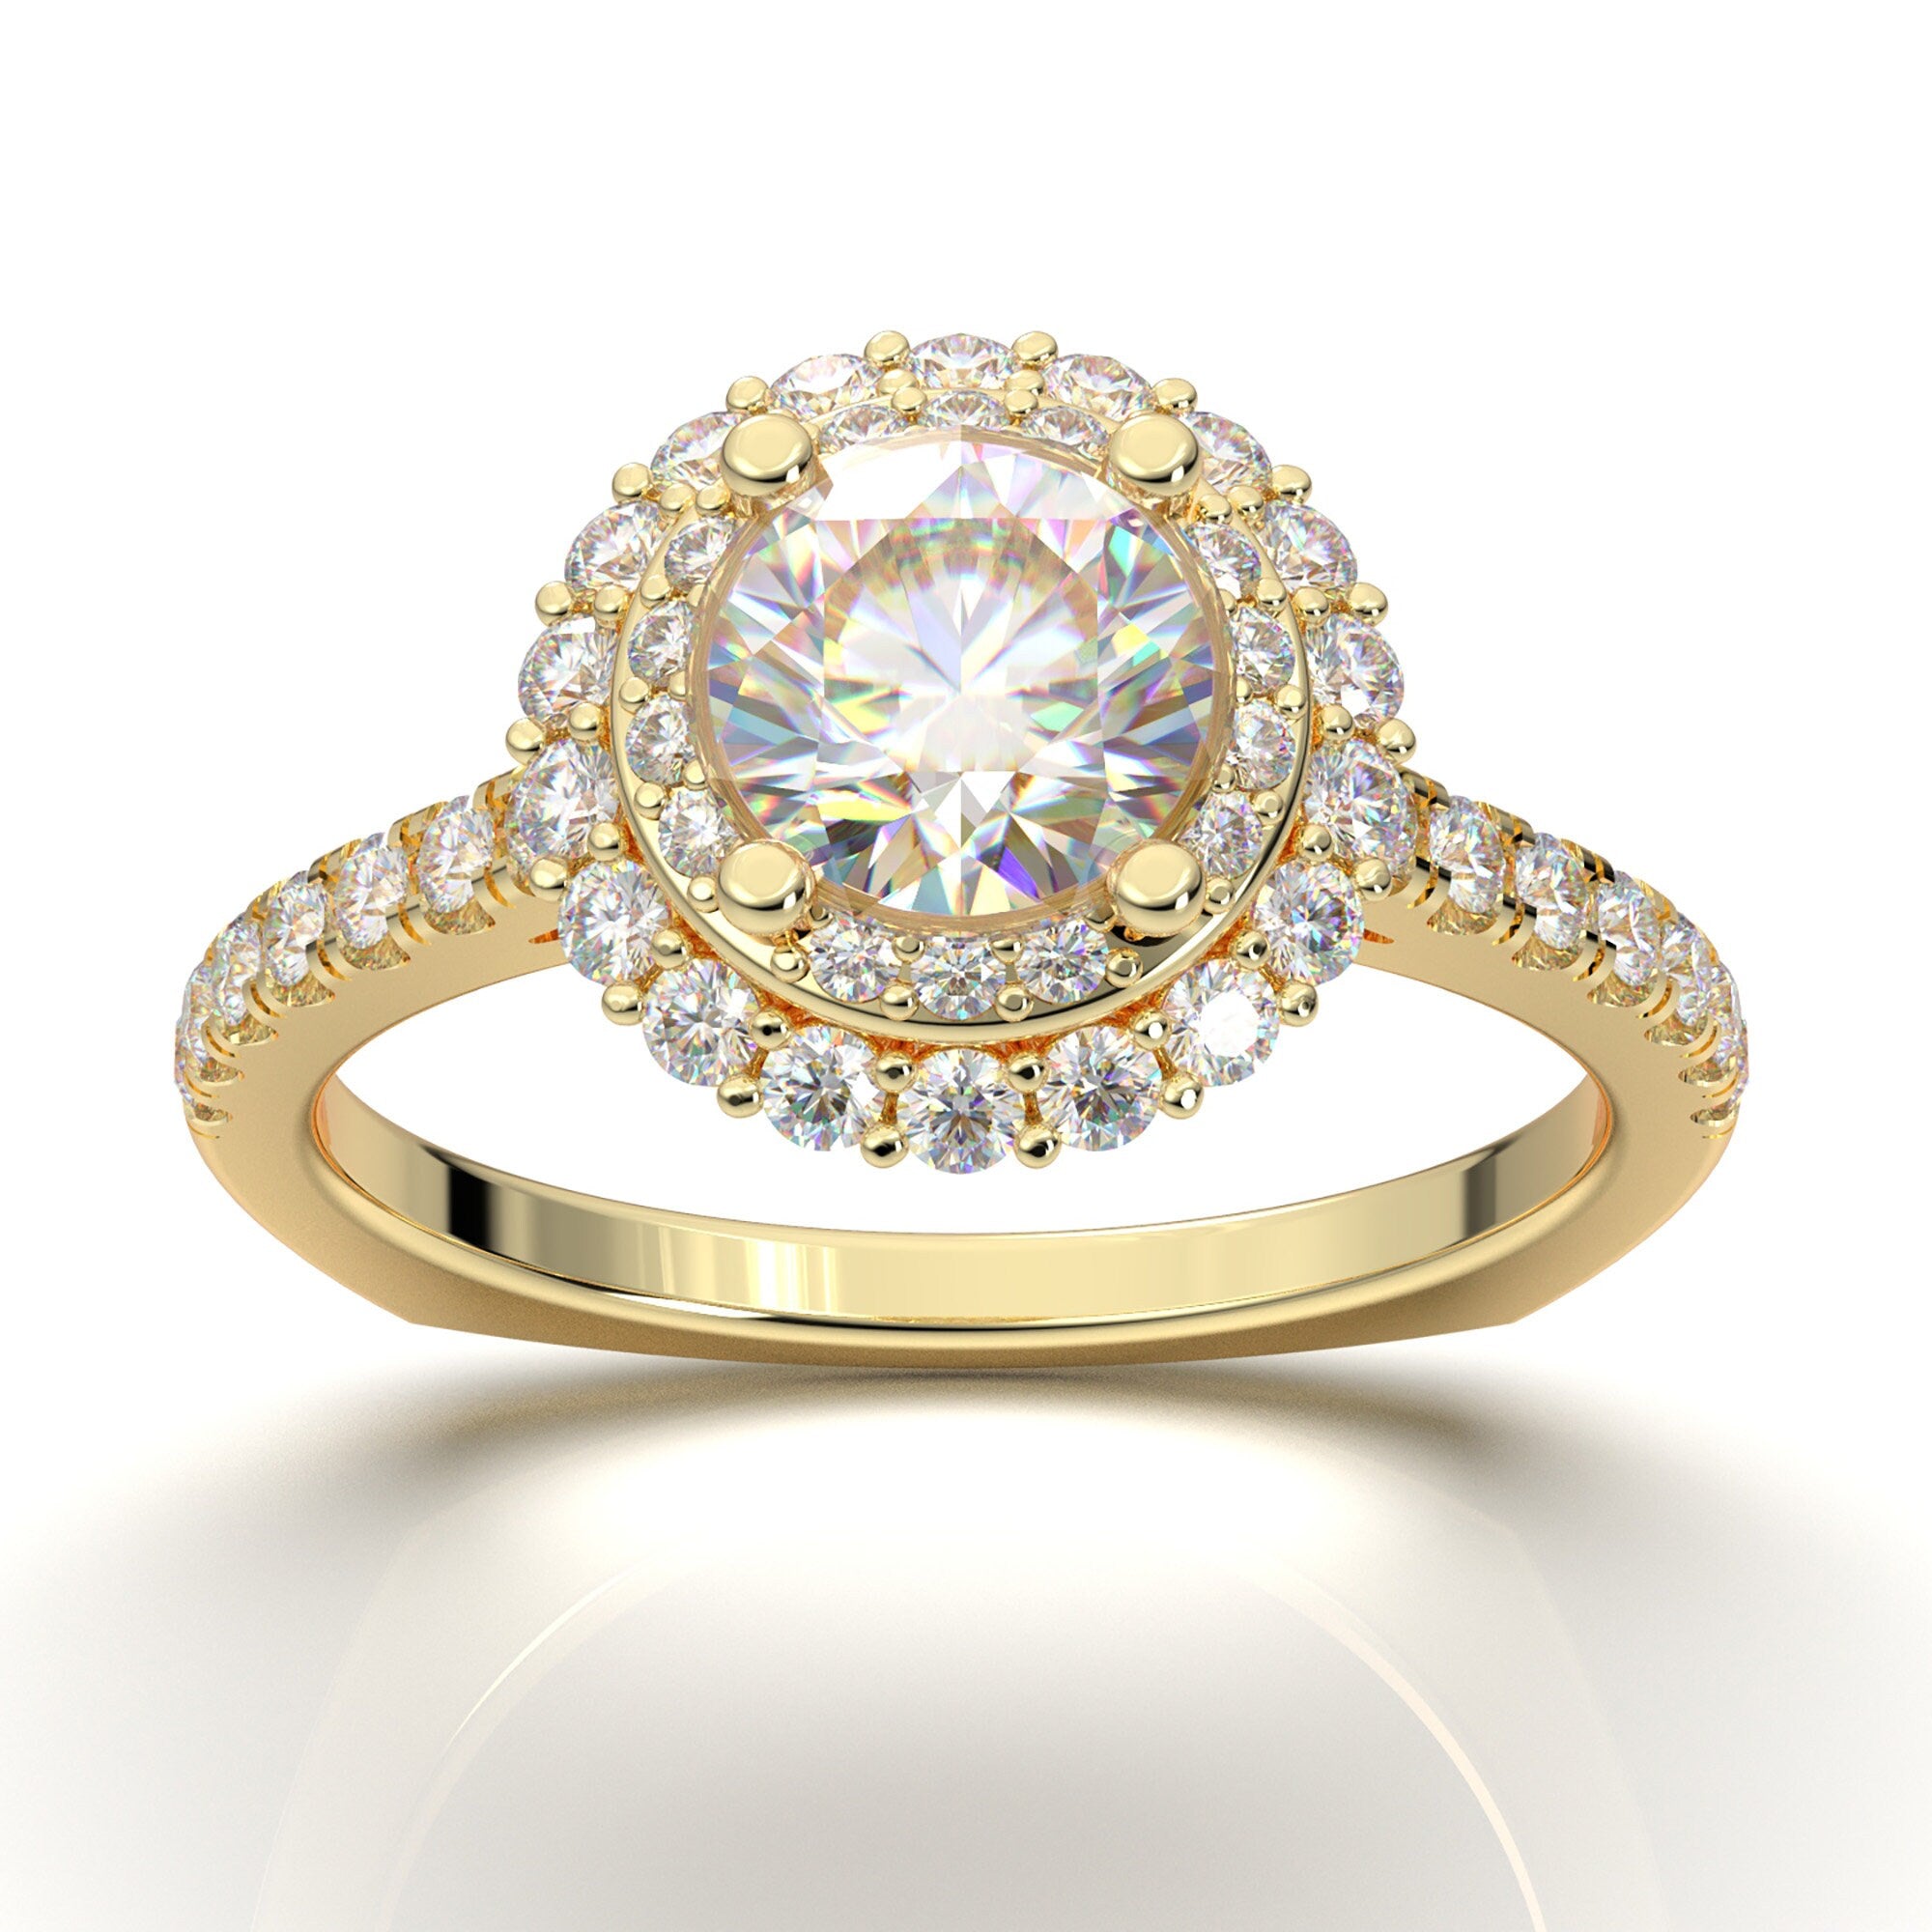 Delicate Rose Gold Engagement Ring features 0.75ct of total Diamonds